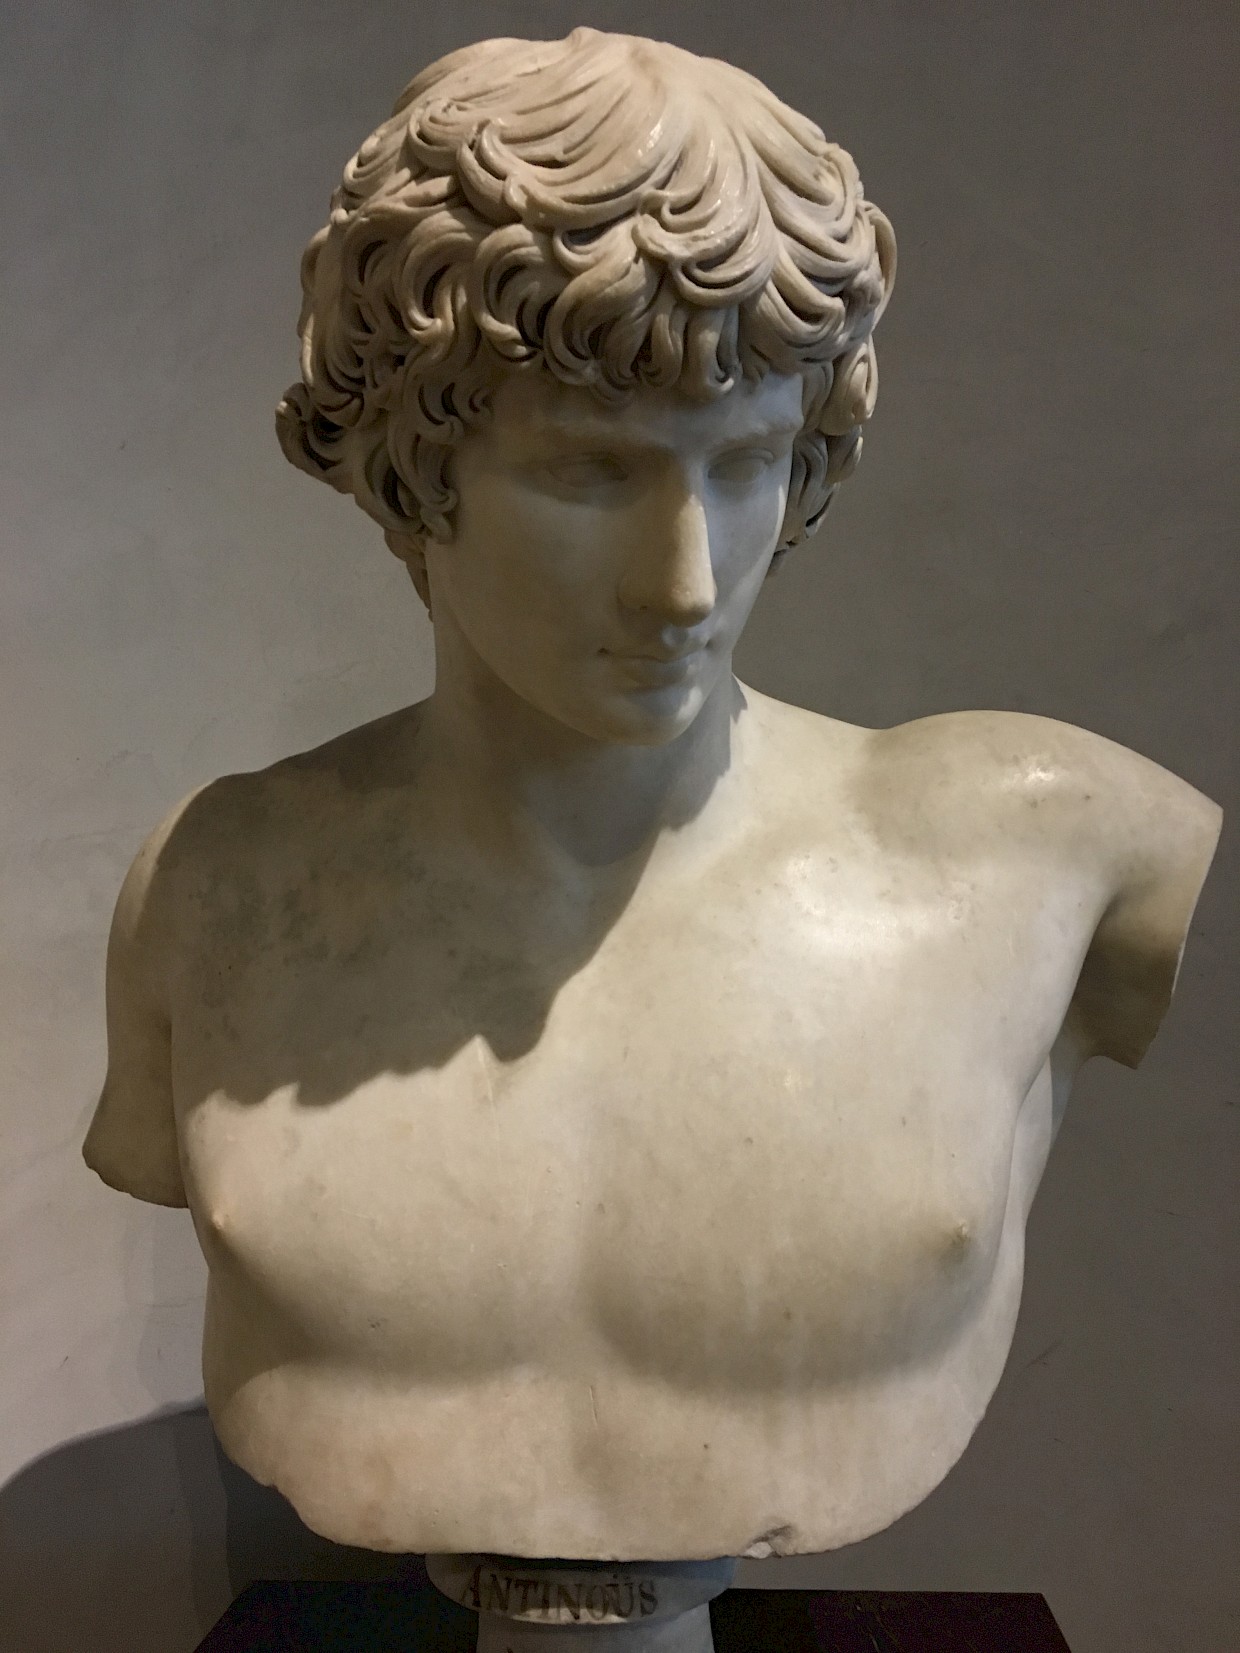 marble bust statue of Antinous that can be used for Plato Ideal Forms analysis